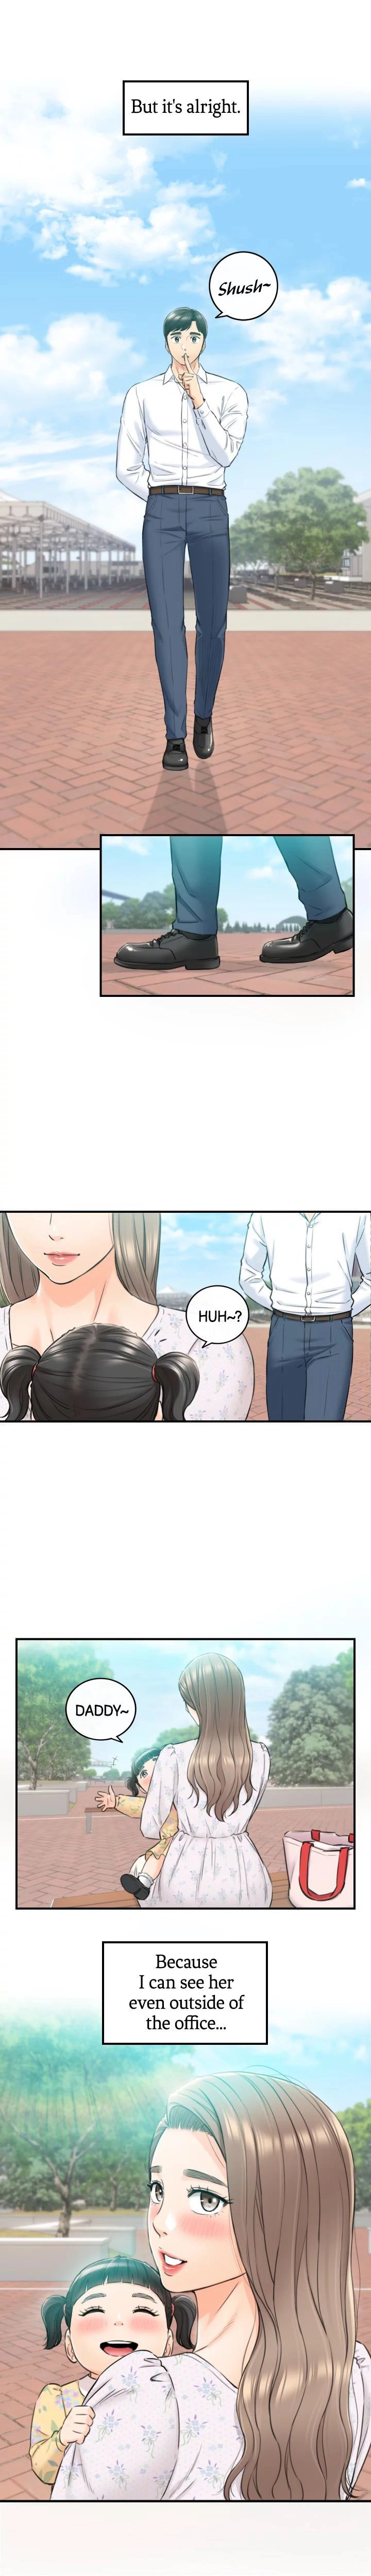 Read Manhwa young-boss, Read Manga young-boss Online